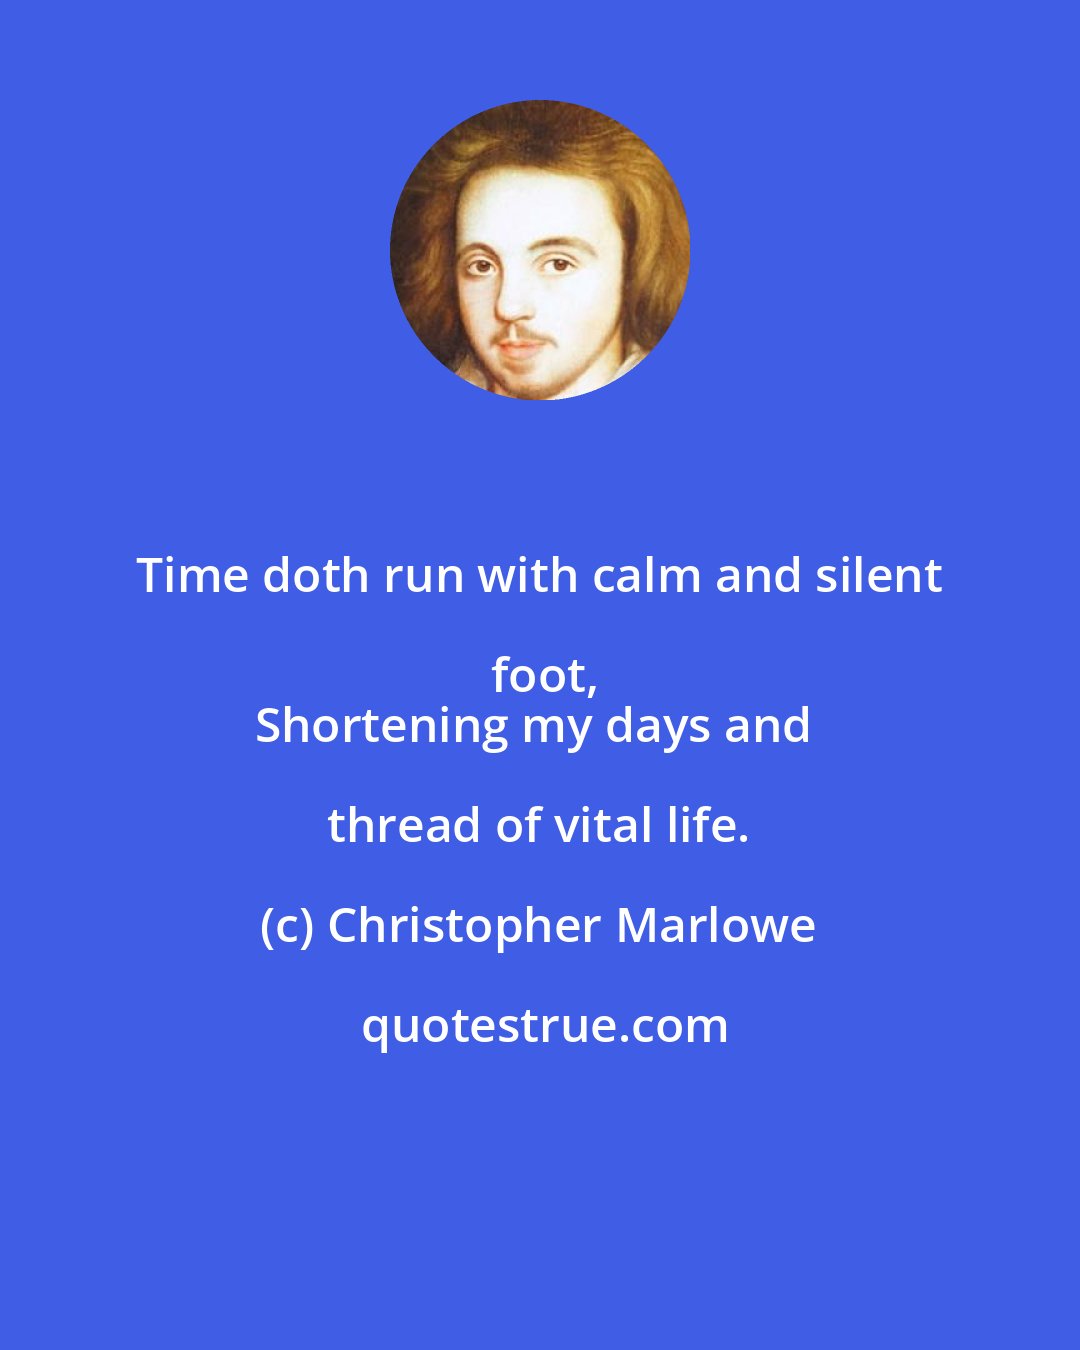 Christopher Marlowe: Time doth run with calm and silent foot,
Shortening my days and thread of vital life.